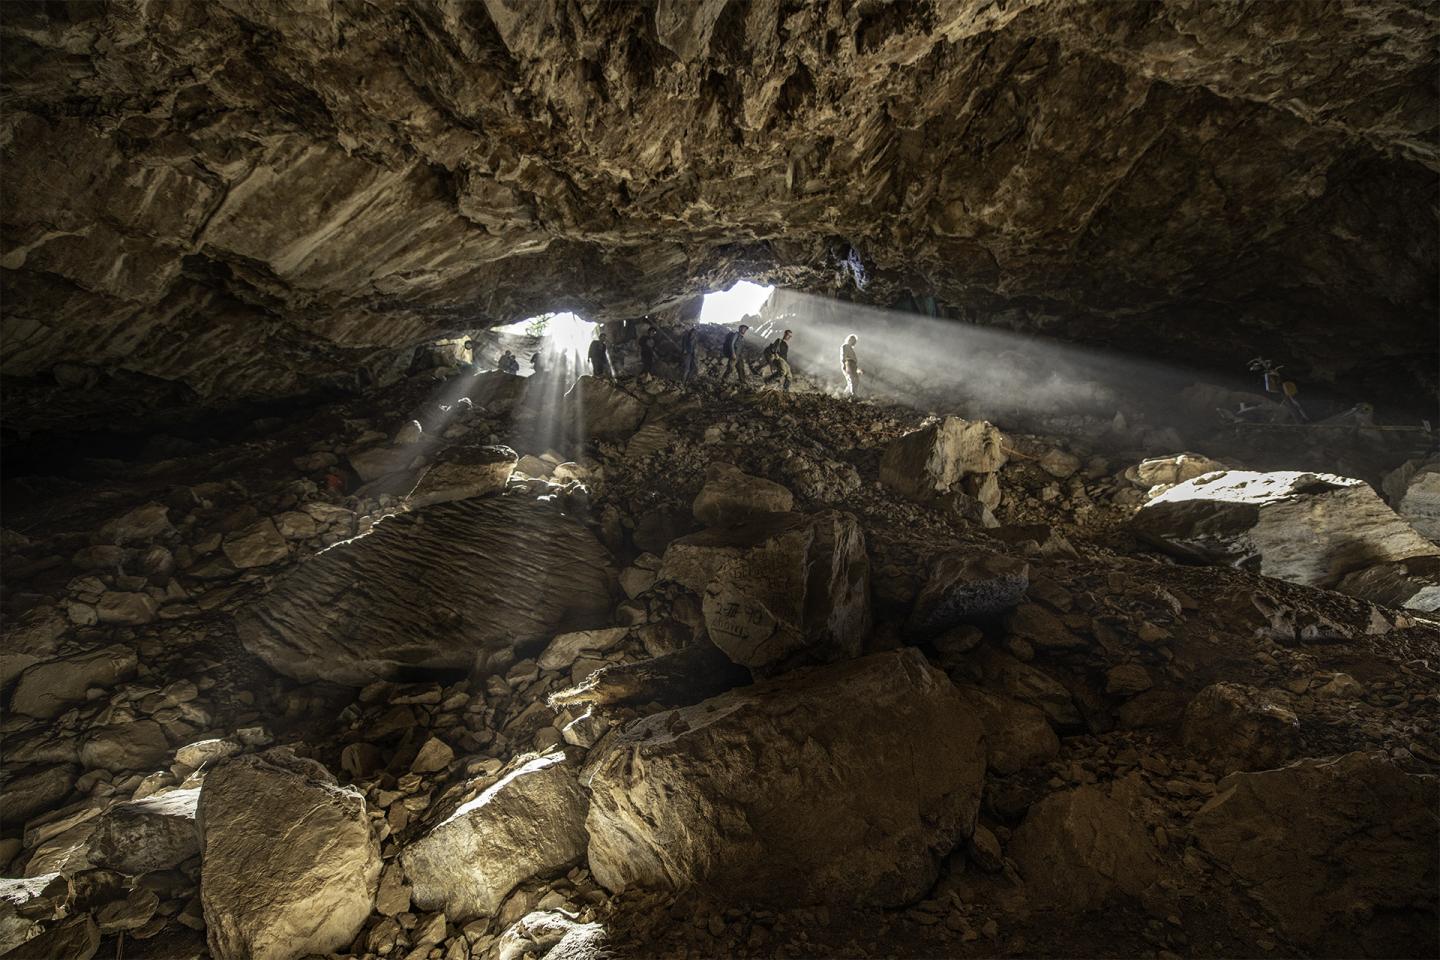 Scientists working in Chiquihuite Cave in Mexico